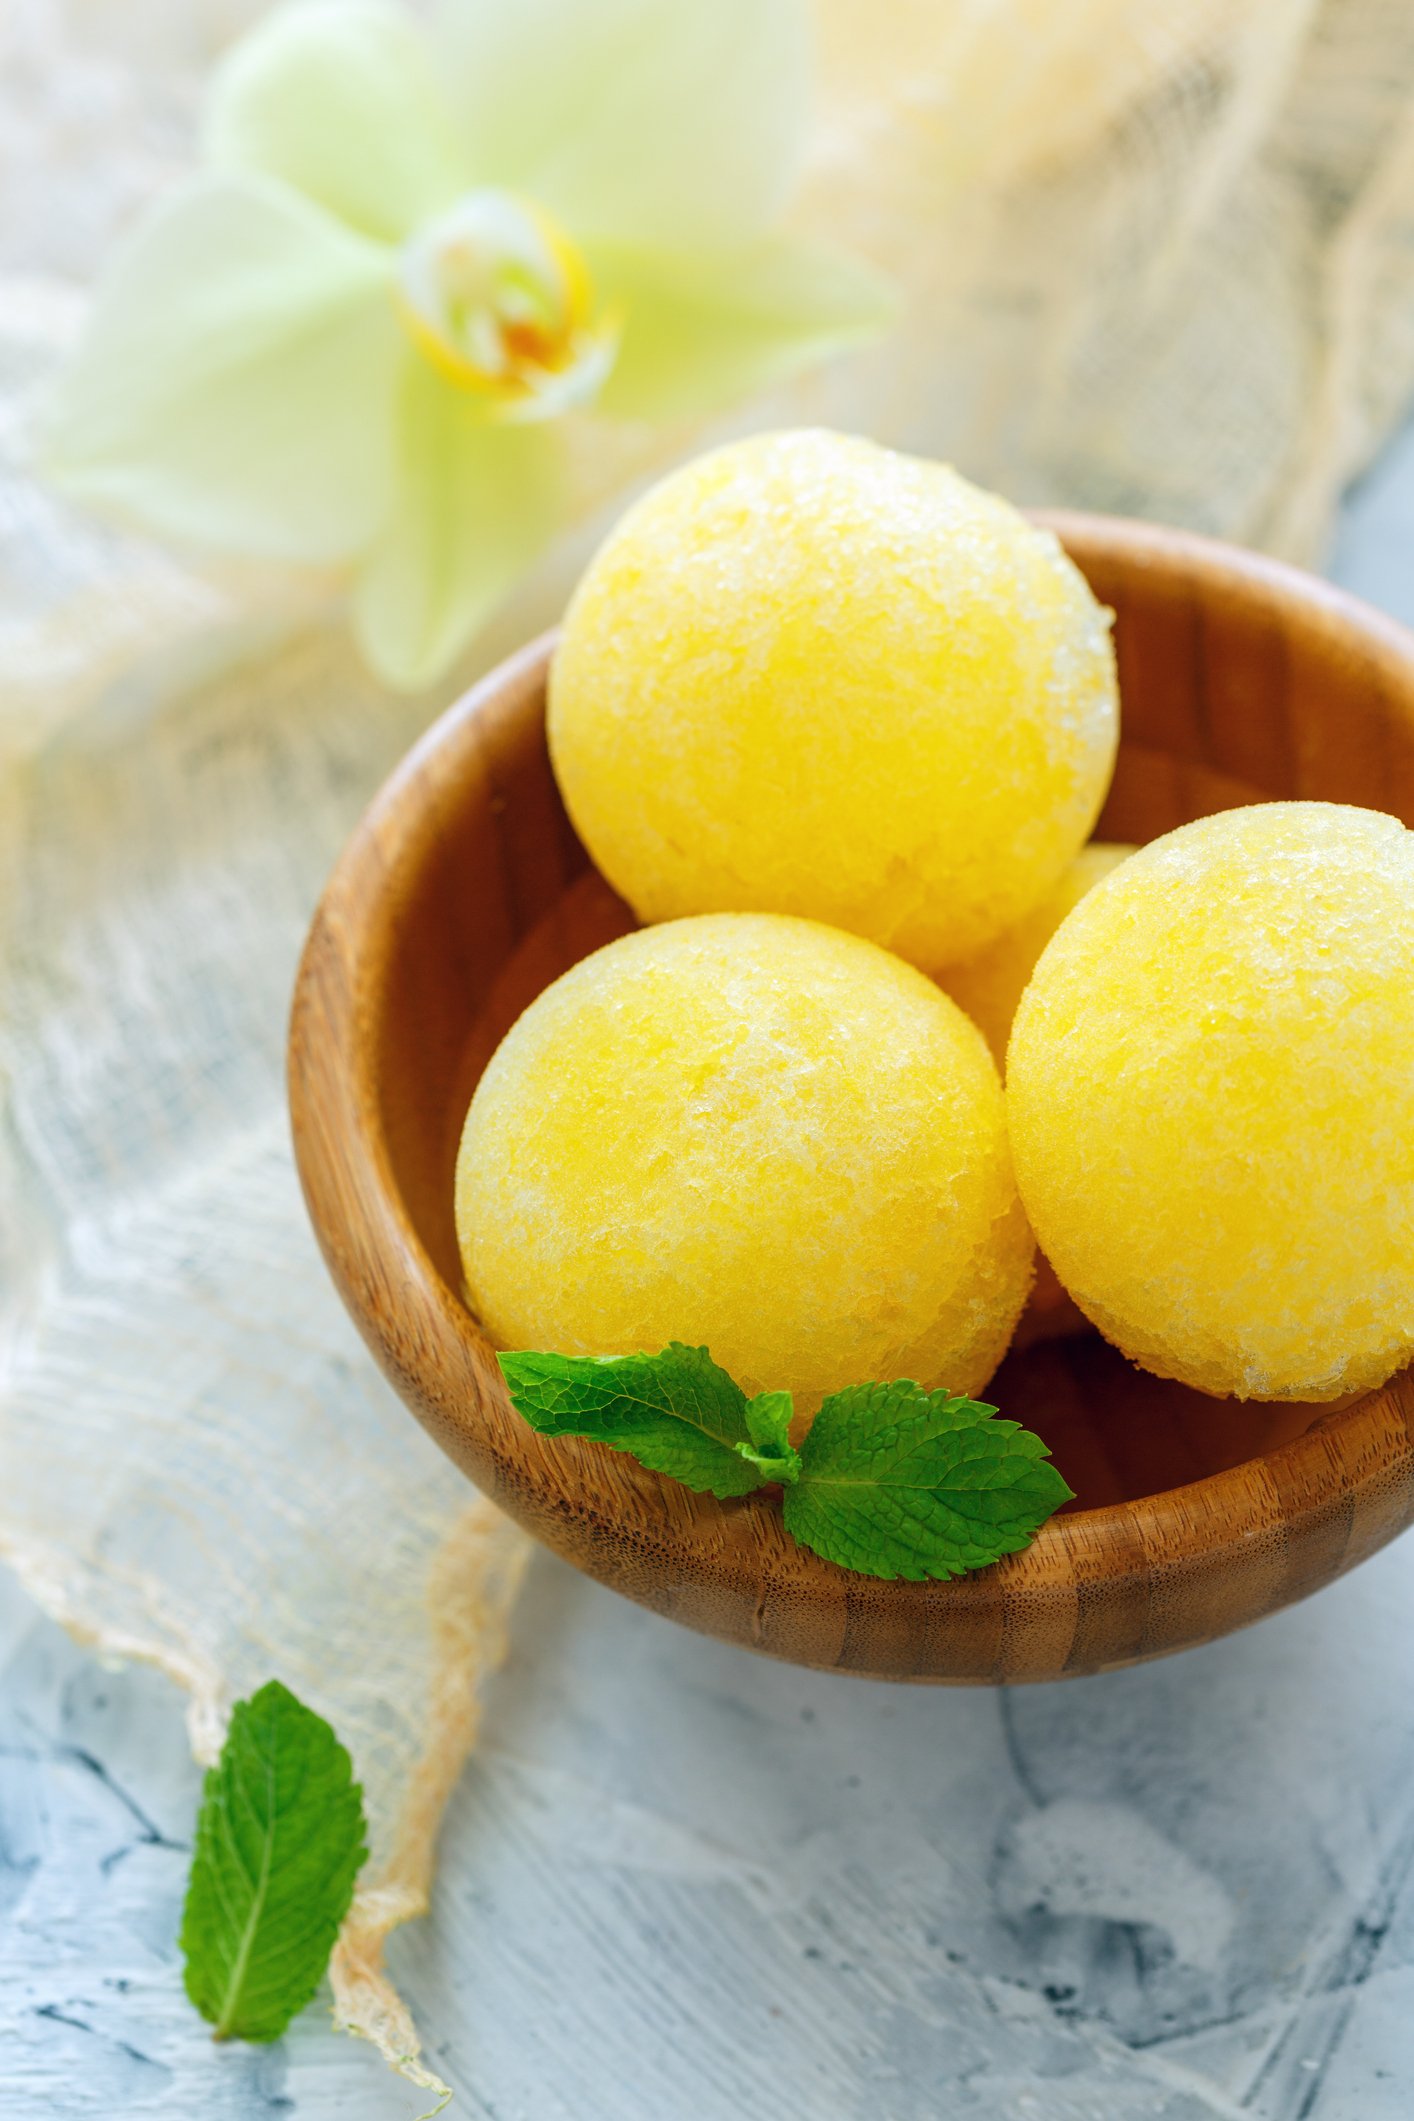 Some delicious melon sorbet is a great post-dinner dessert. (iStock Photo)